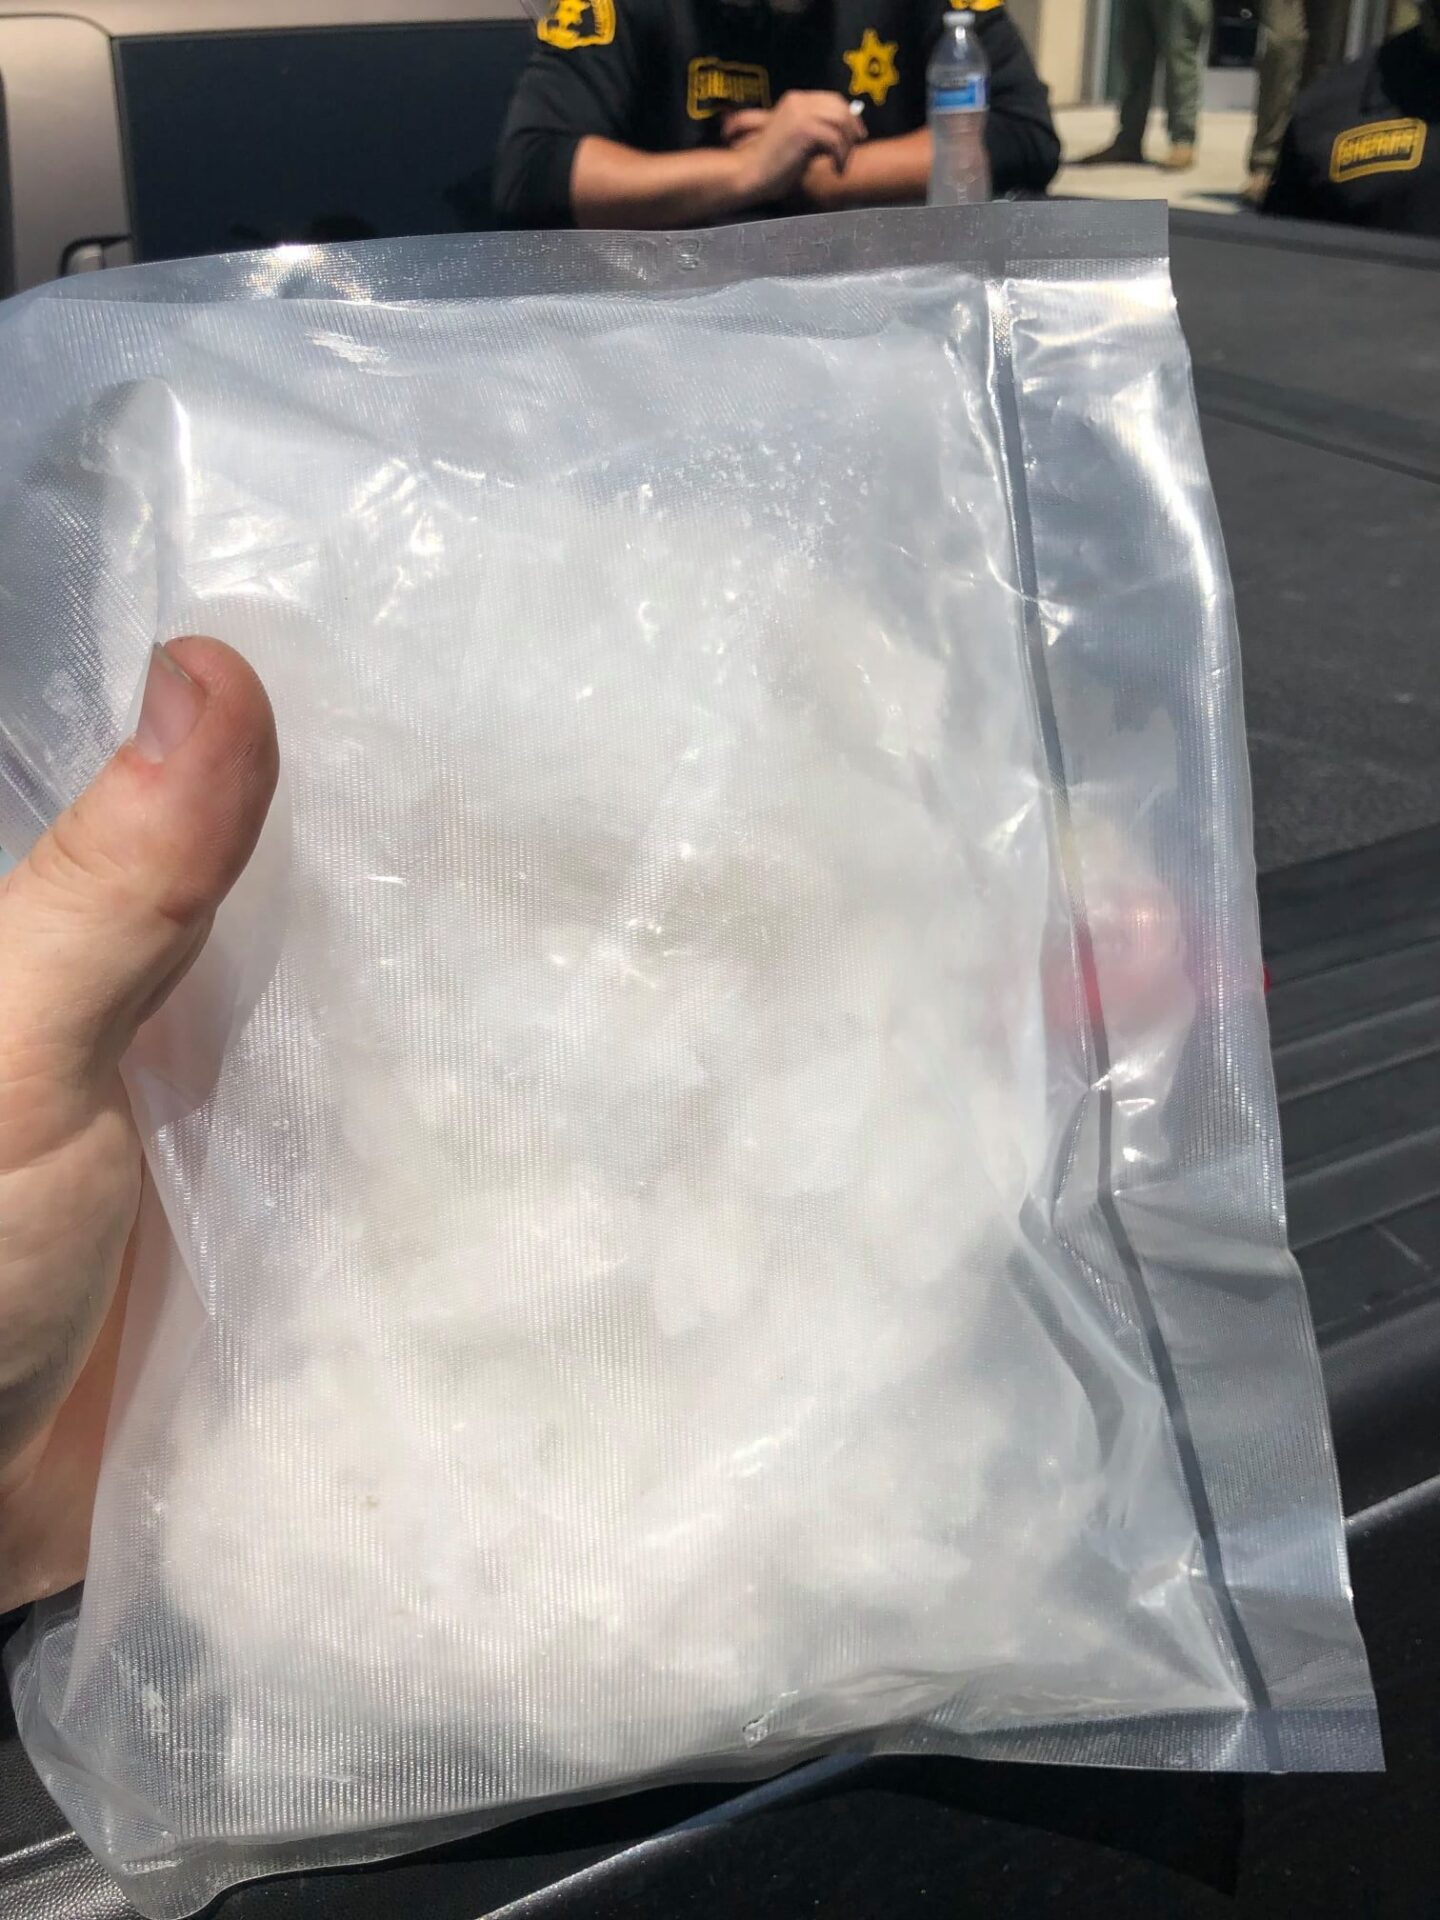 Bag of methanphetamine, Large bag, aproxemetly 8 inches by 6 inches, full of white rock like substance.